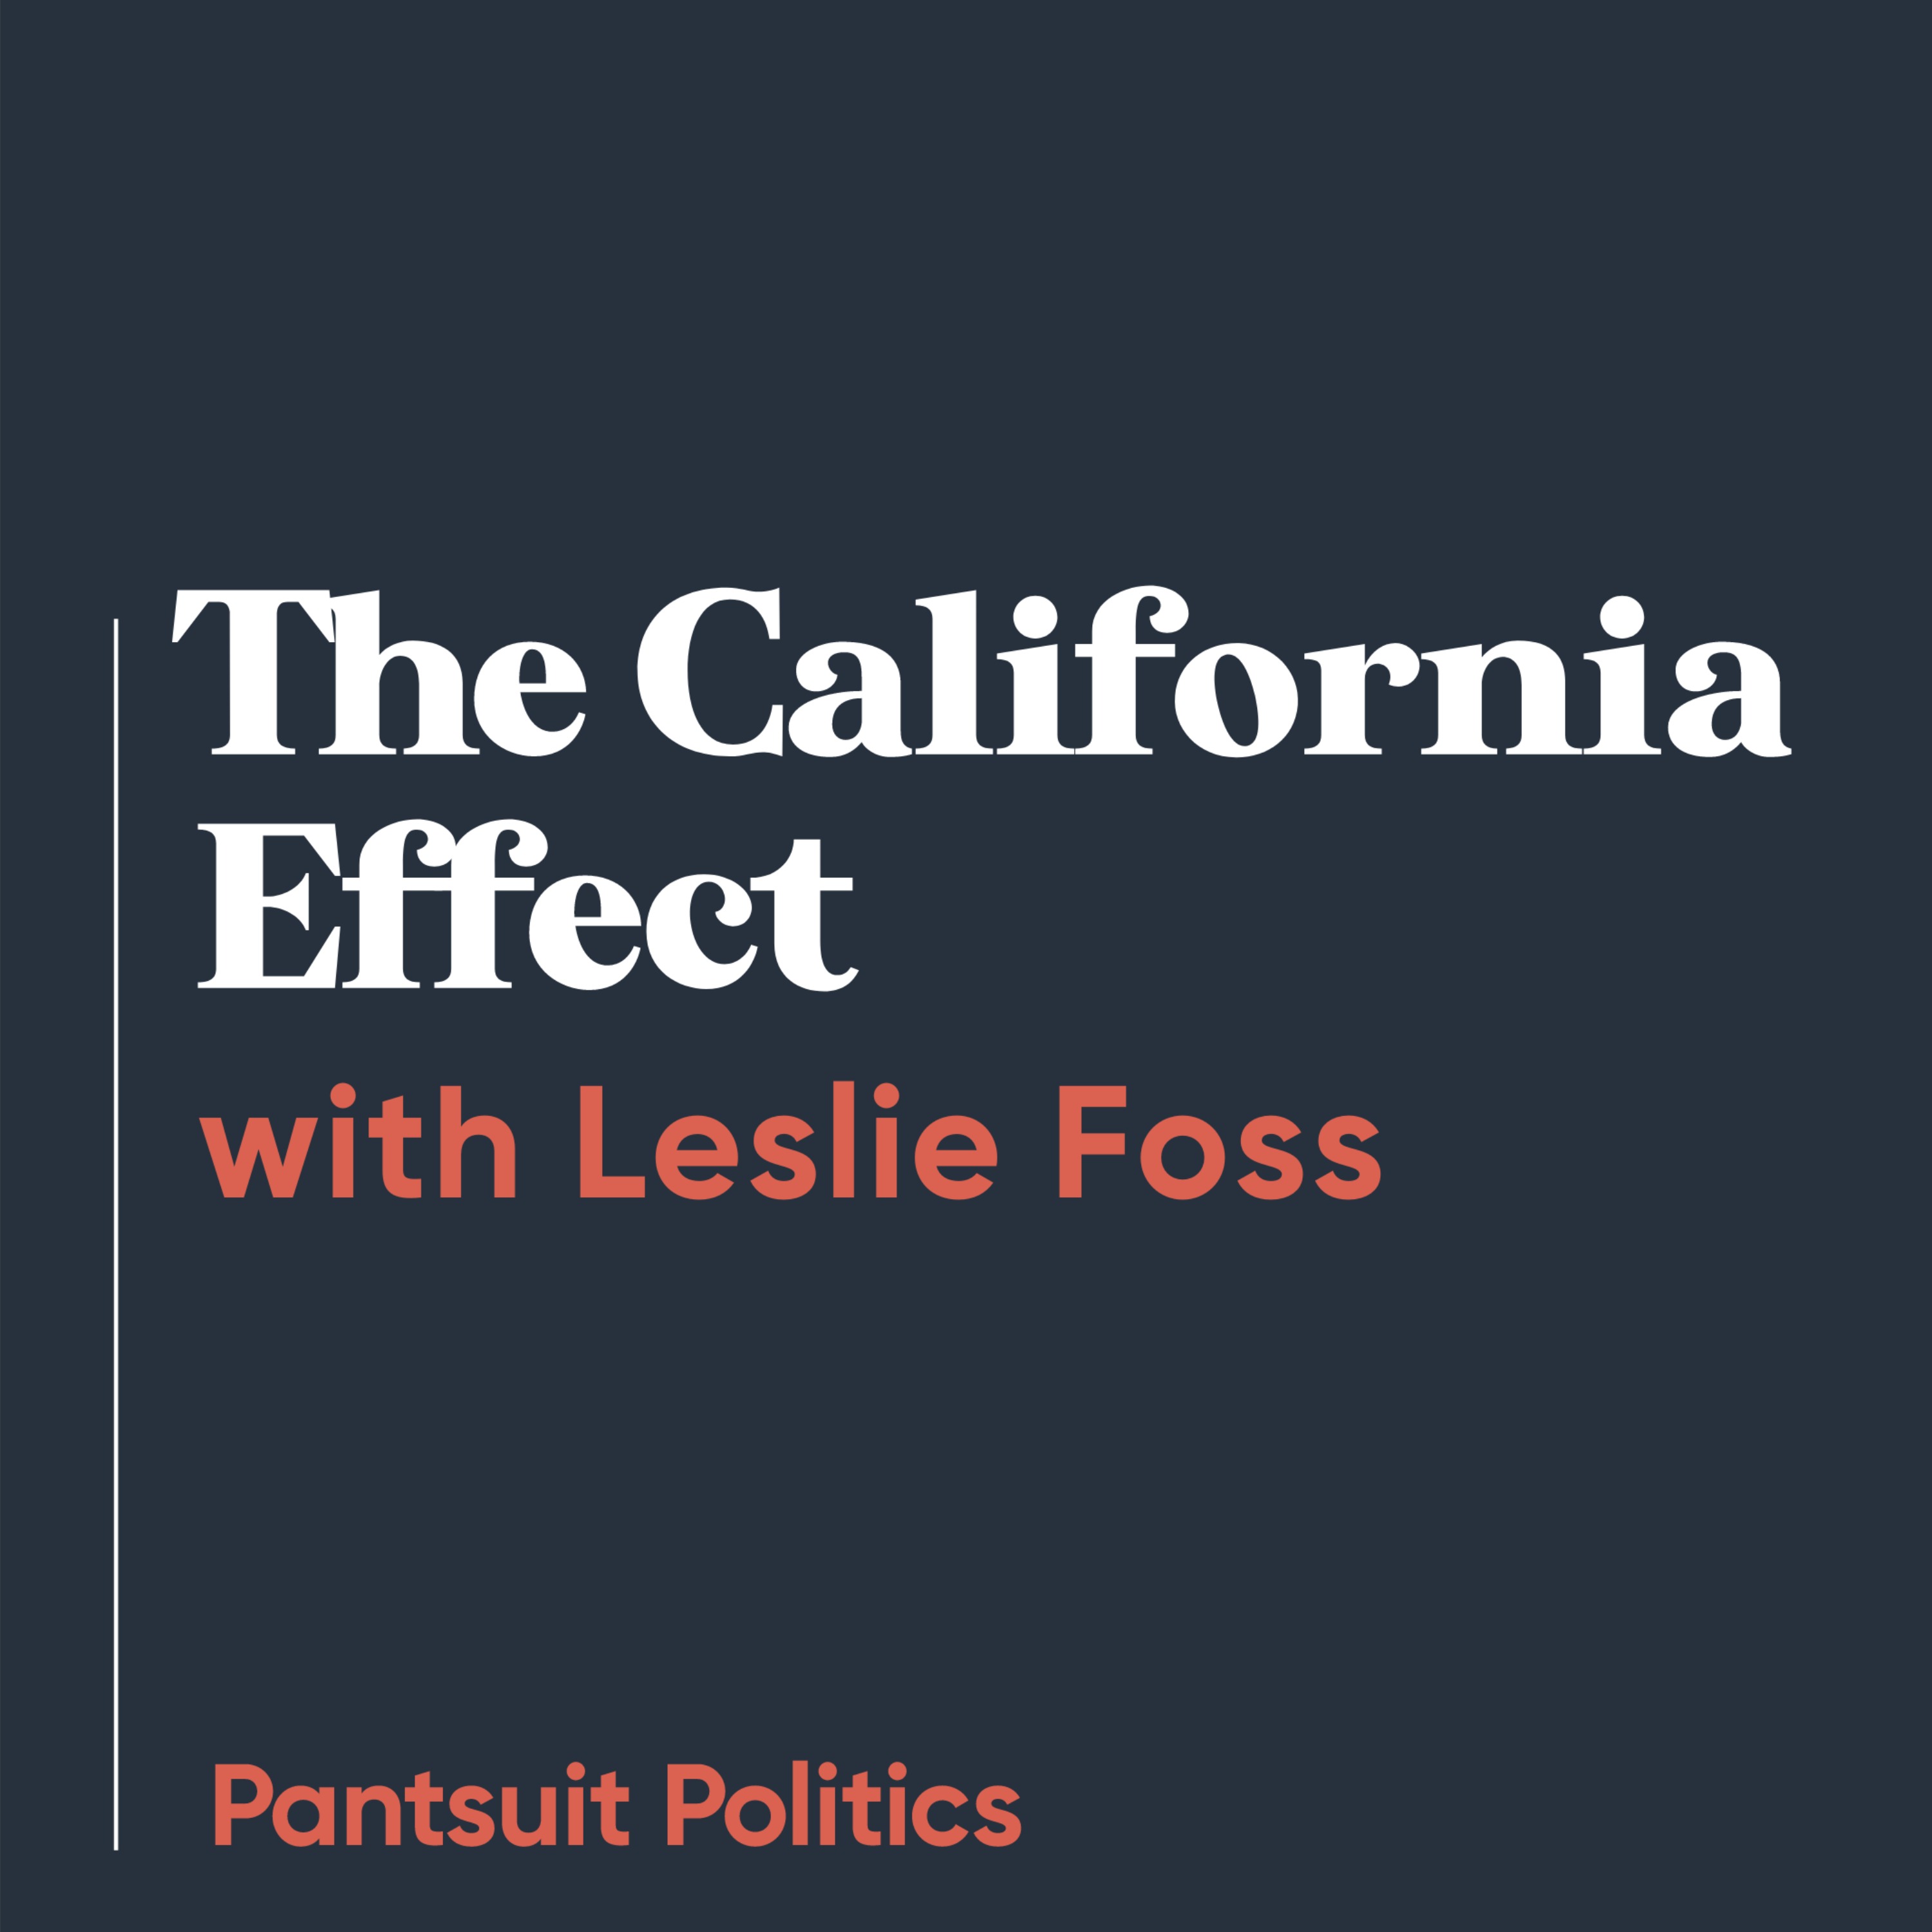 The California Effect with Leslie Foss